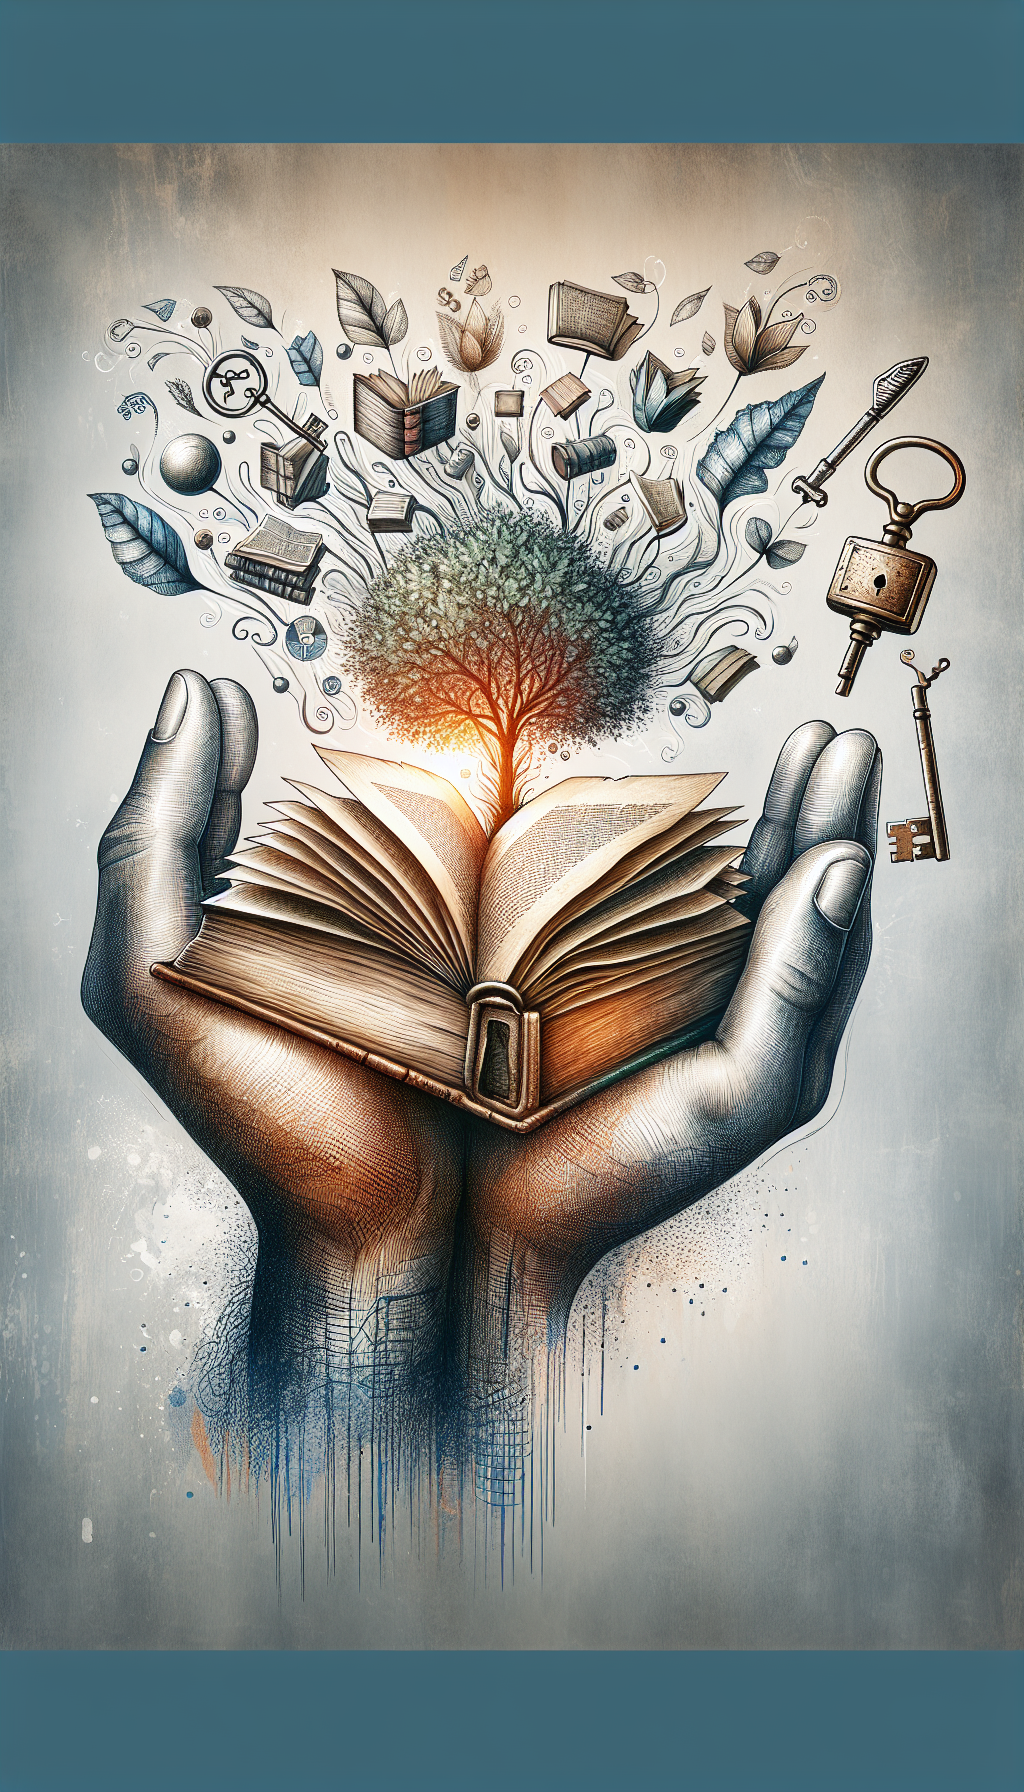 An illustration shows an aged book cradled in hands made of tree branches, symbolizing growth and care. An old key and lock hover nearby, signifying security and preservation. The book's vibrant, unfaded illustrations contrast with the duller background, emphasizing the effectiveness of preservation in maintaining value. The differing sketch, watercolor, and vector styles within the image reflect various preservation techniques.